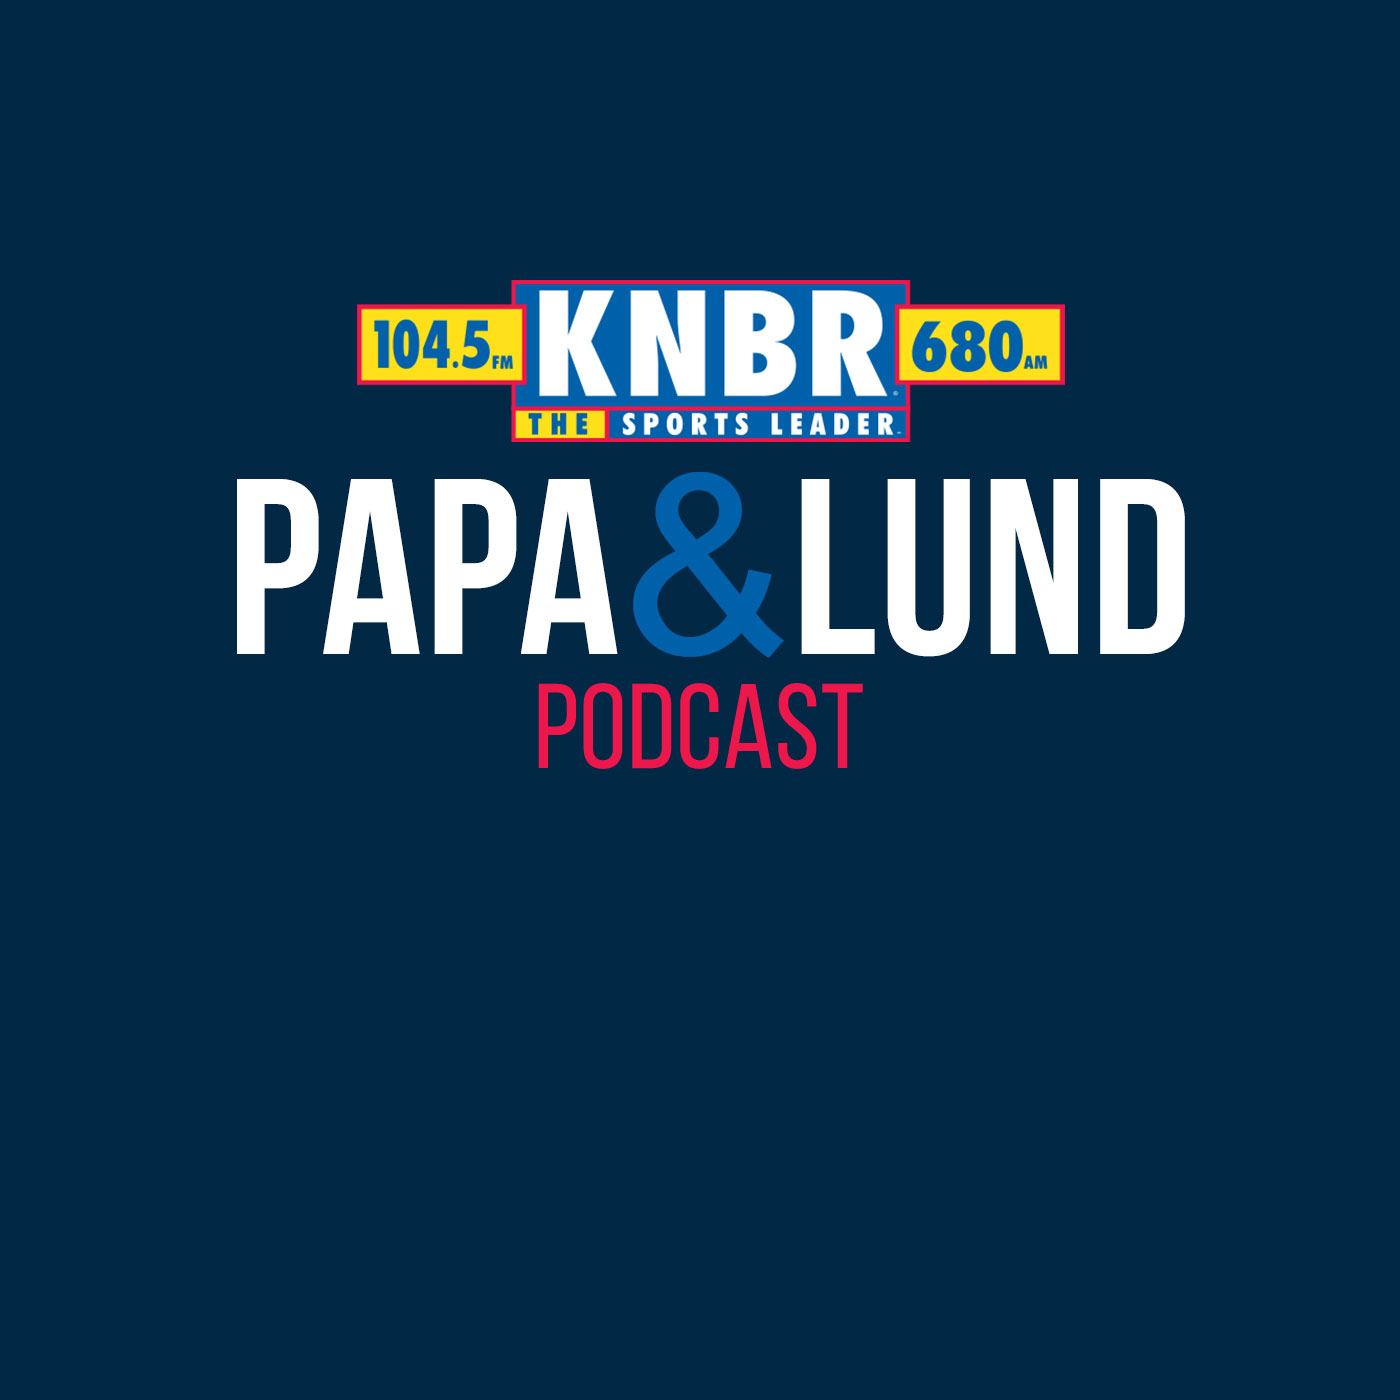 12-21 Donte Whitner joins Papa & Lund to discuss how the 49ers defense plans to stop the run attack of the Ravens and the best way to slow down Lamar Jackson